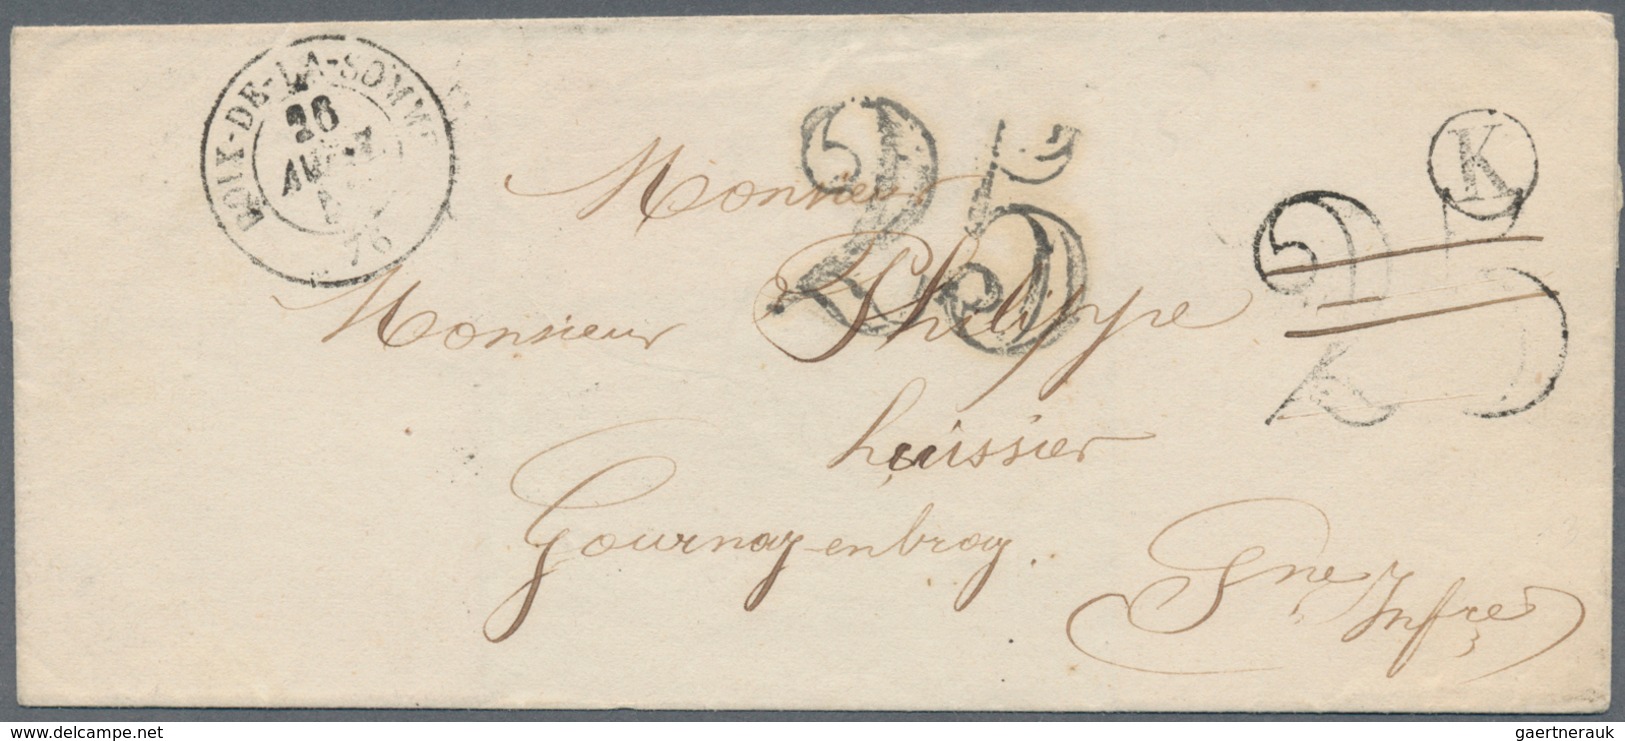 26361 Frankreich: 1811/1871, lot of 30 stampless covers from some pre-philately, showing a lovely selectio